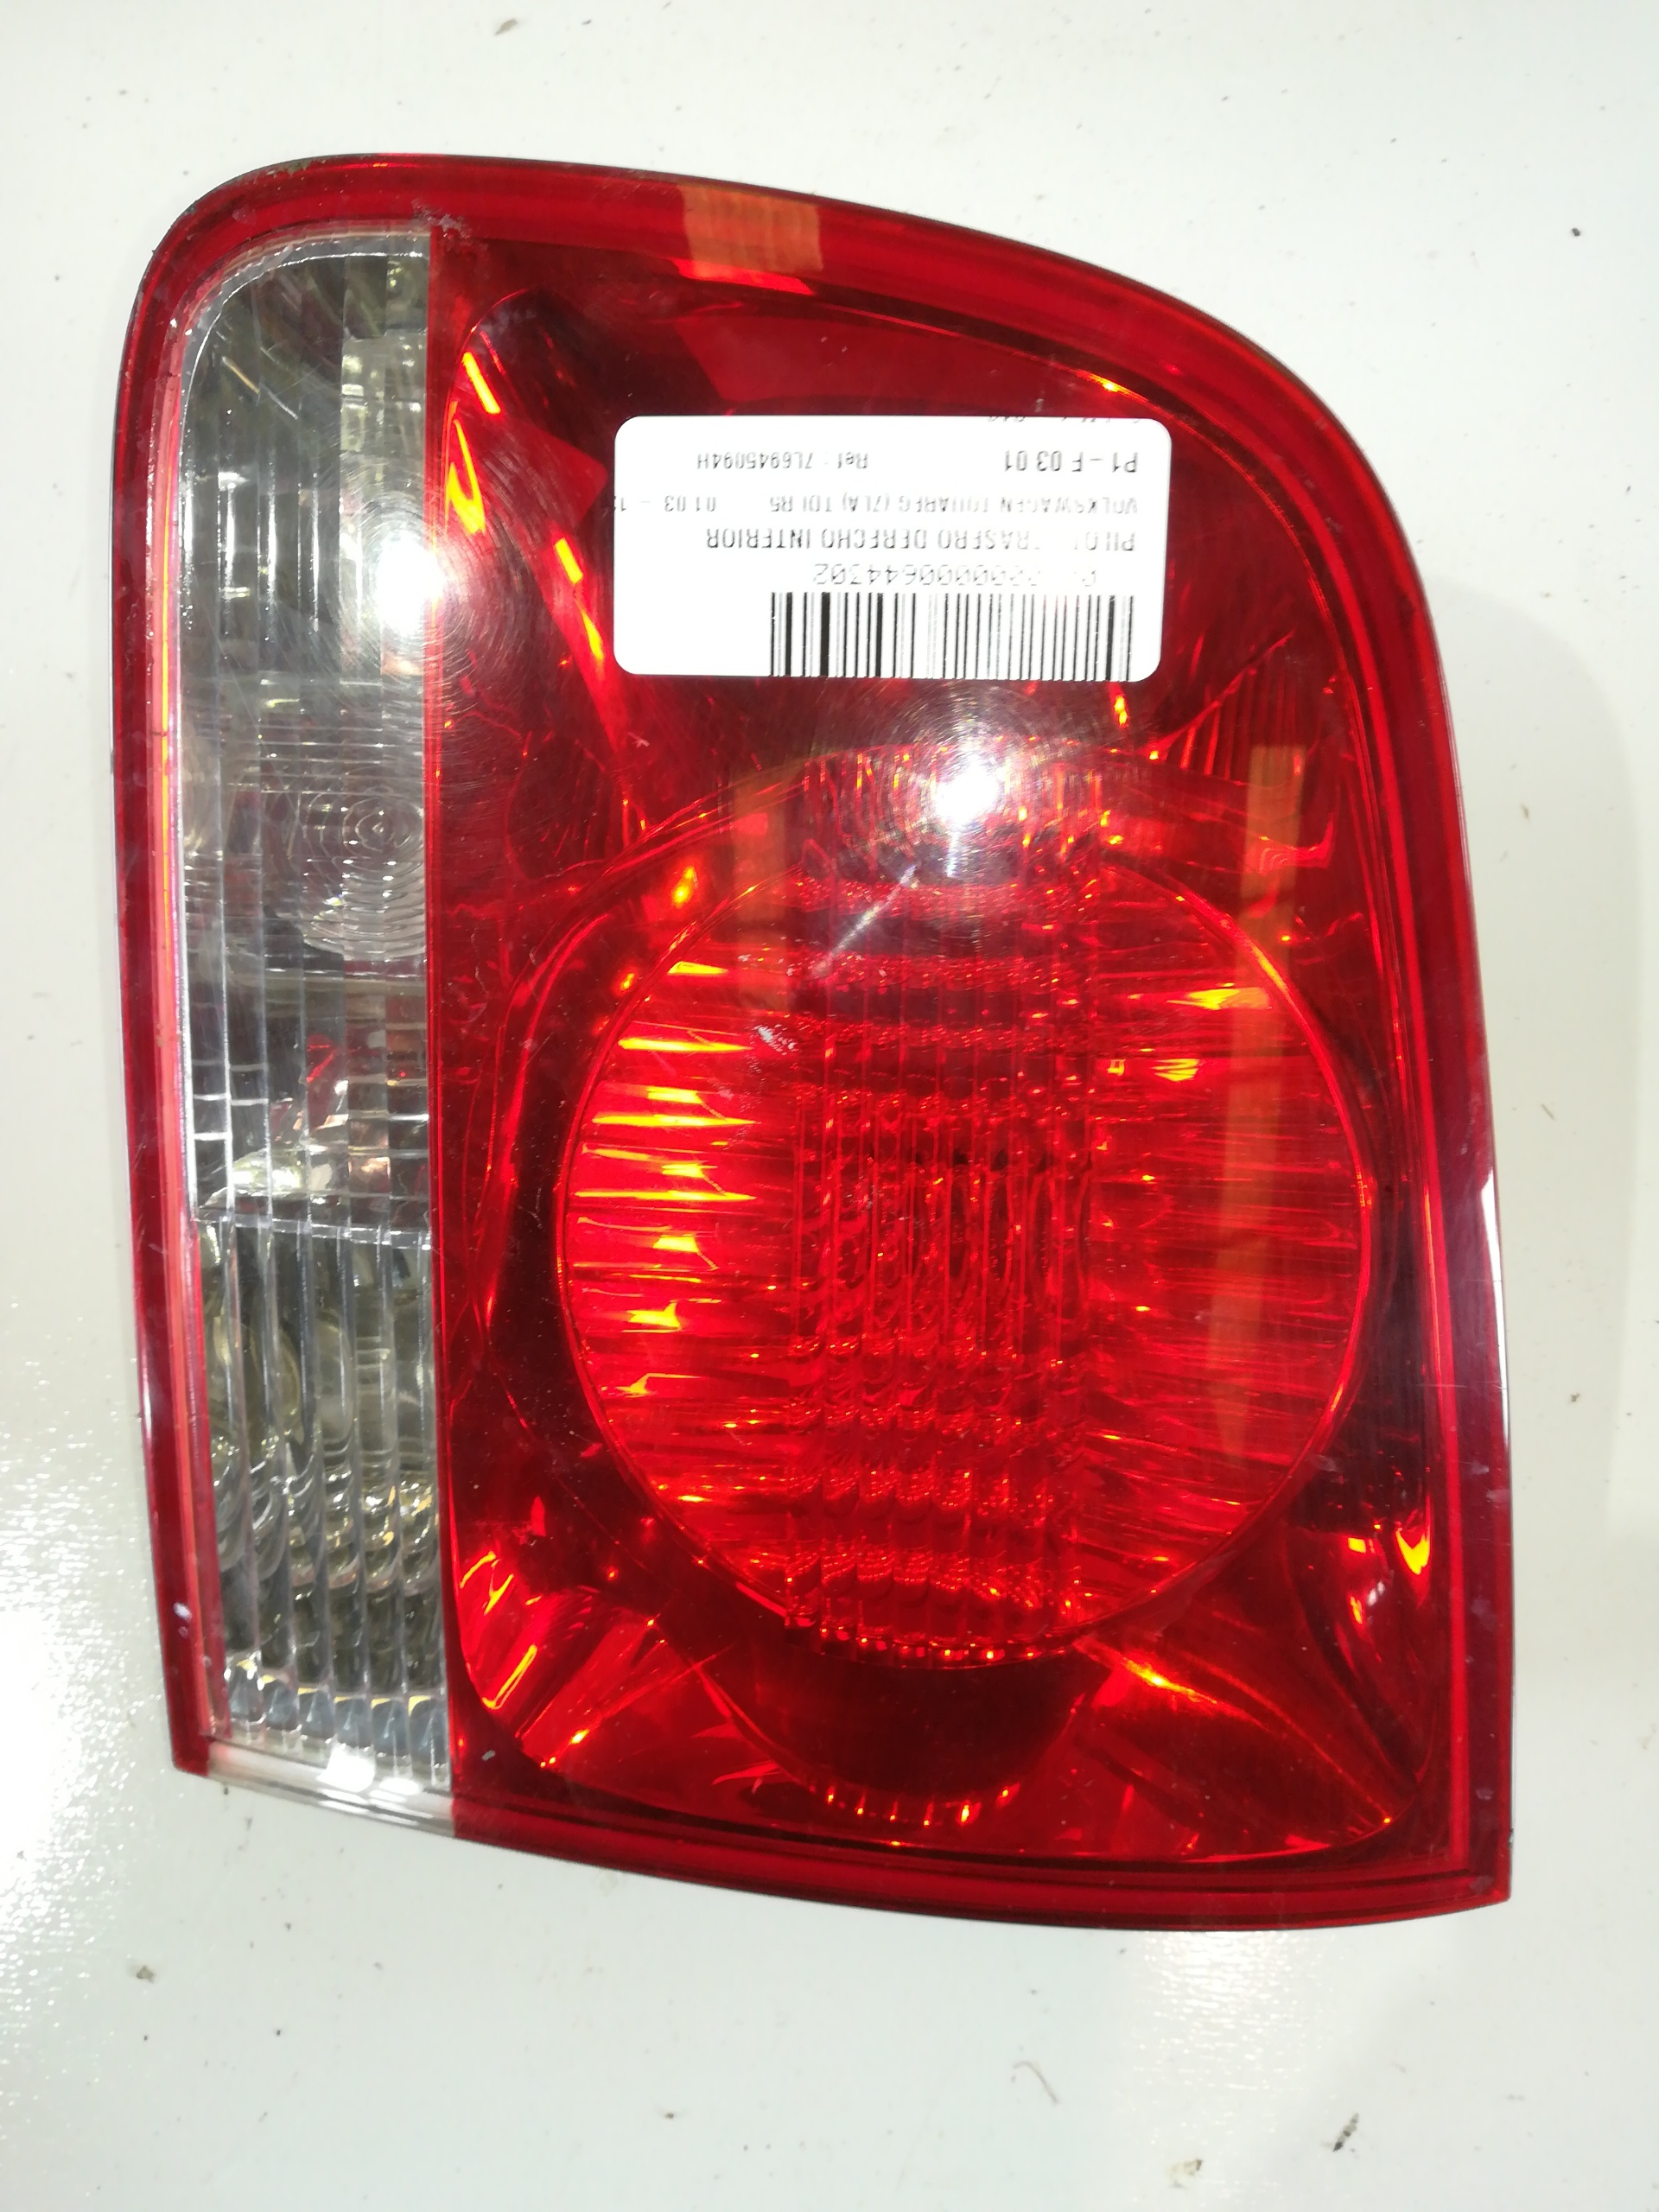 VOLKSWAGEN Touareg 1 generation (2002-2010) Rear Right Taillight Lamp 7L6945094H, 4PINES 24875908